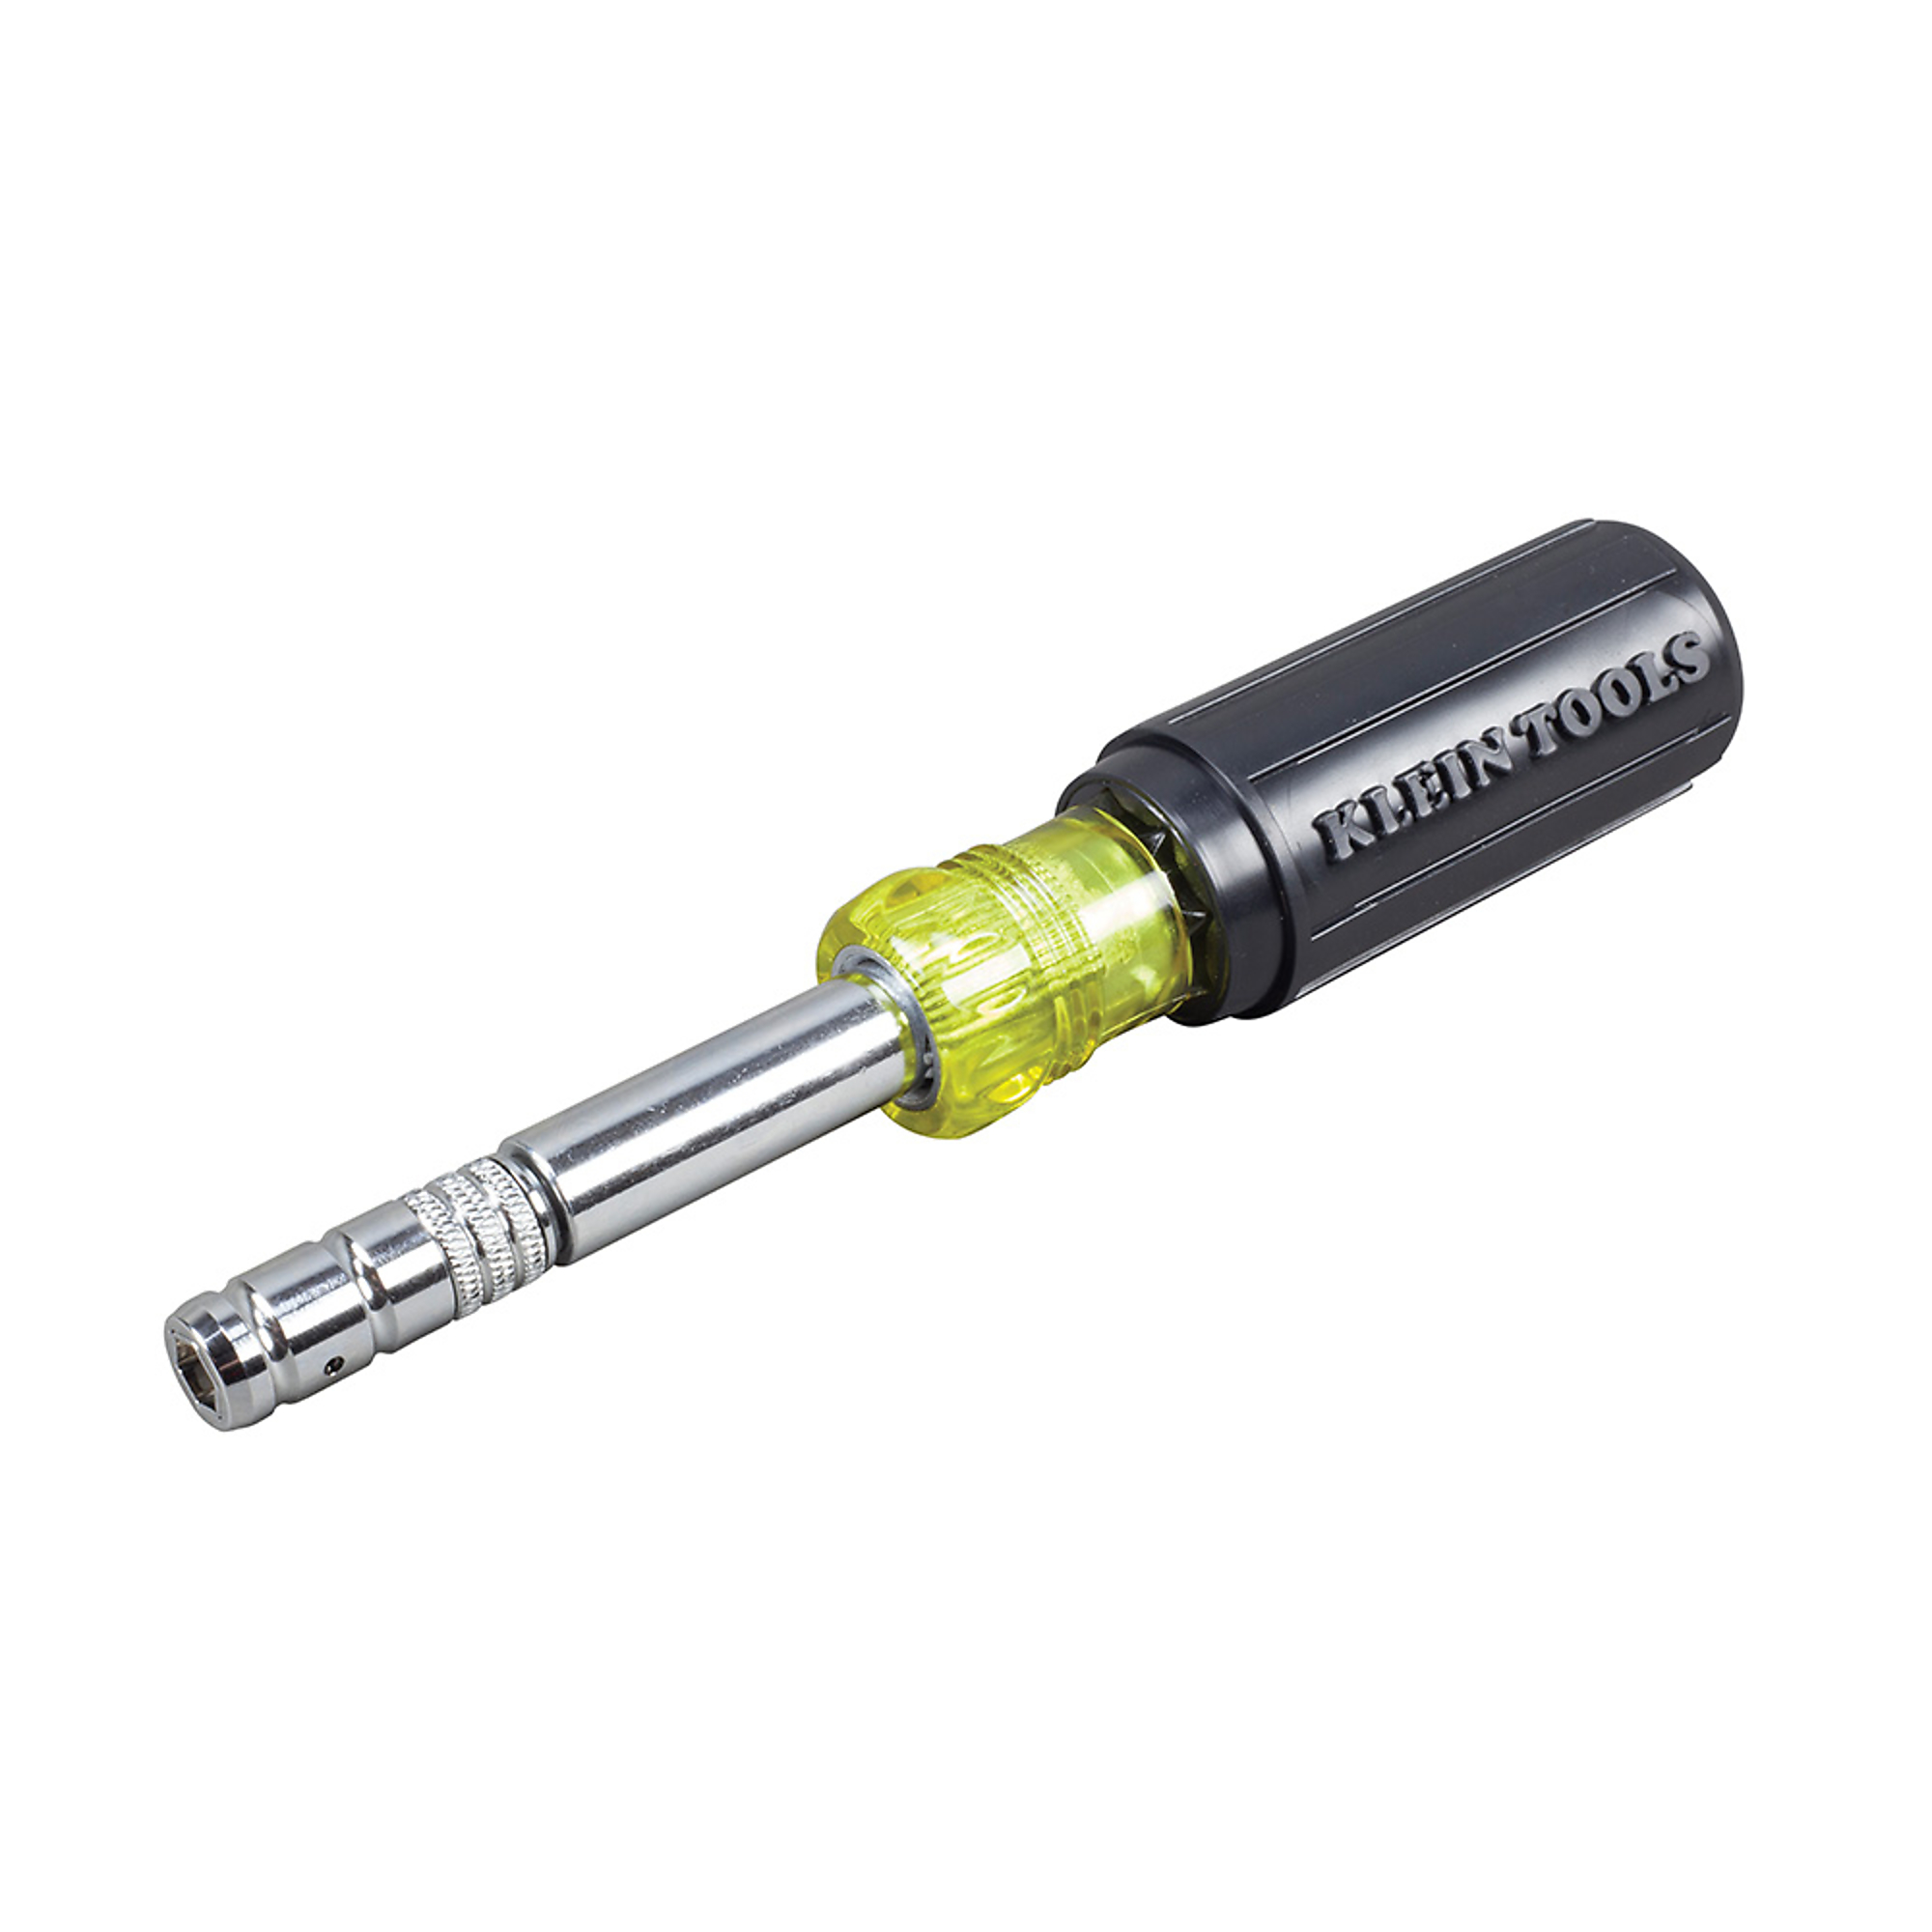 Klein Tools, 8Inch-1 Slide Driver Screw/Nutdriver, Drive Type Combination, Model 32596